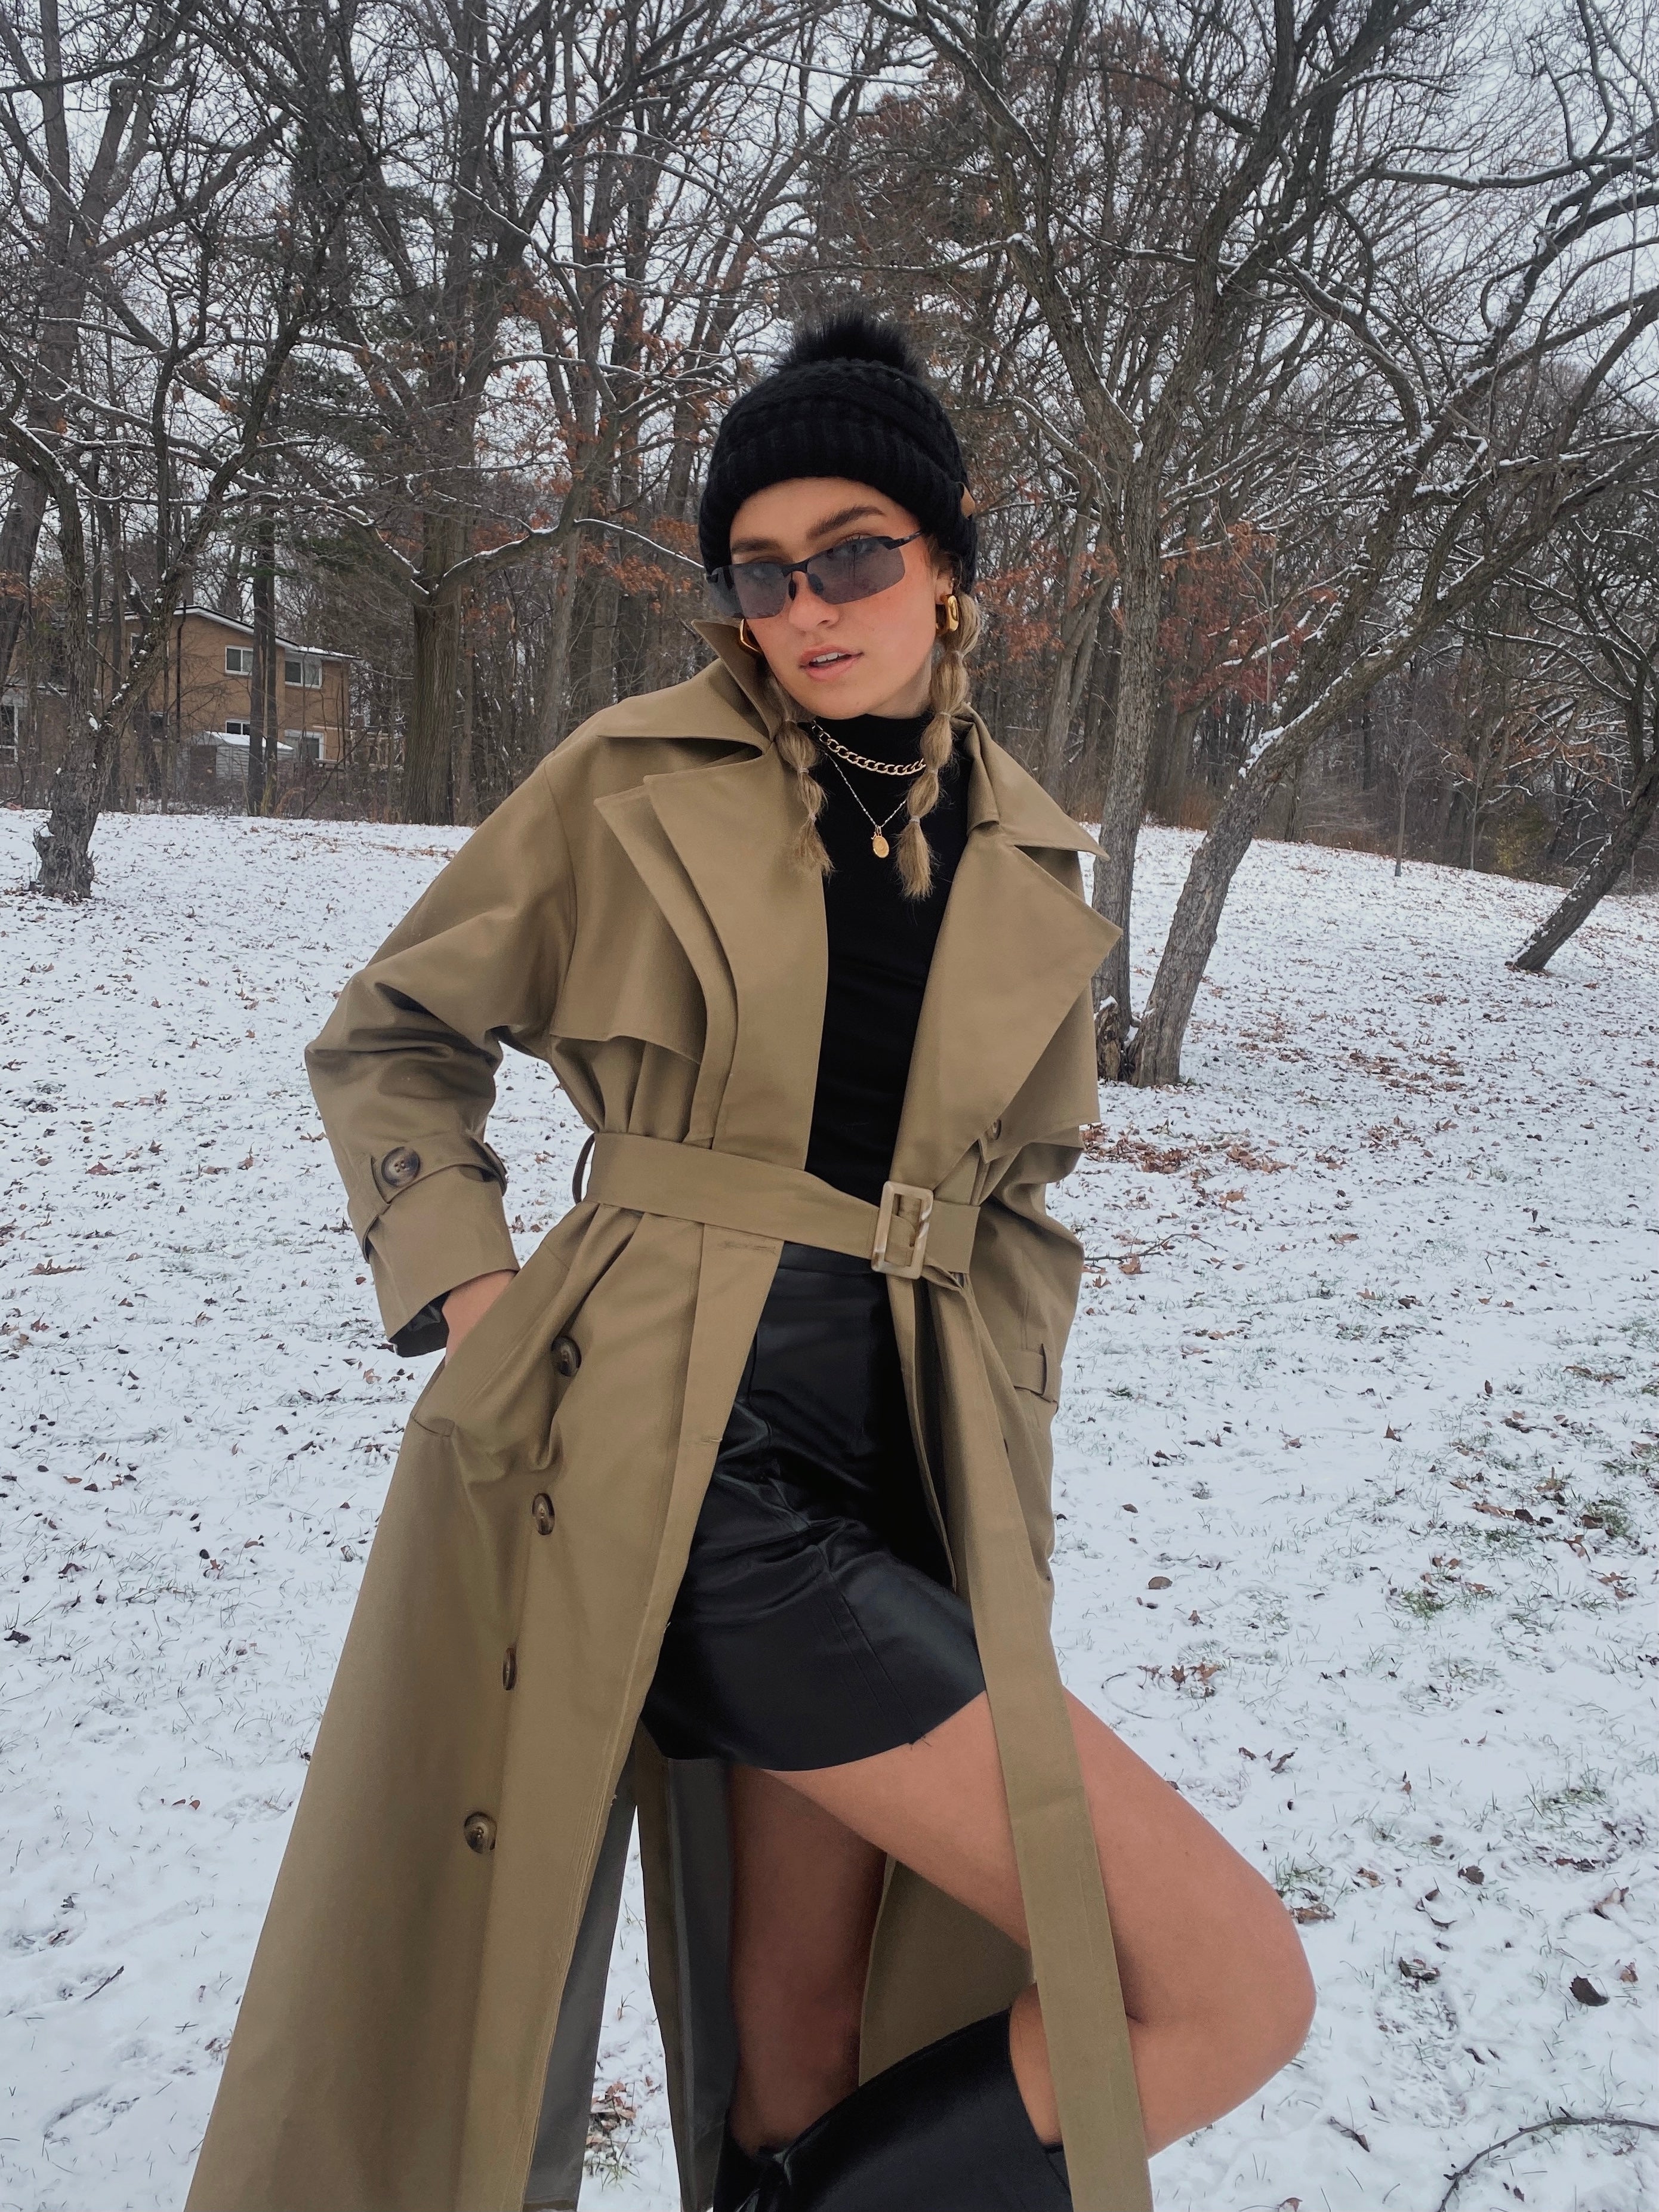 Niki Victoria wearing The Mary Trench Coat by Bastet Noir, custom-made for her